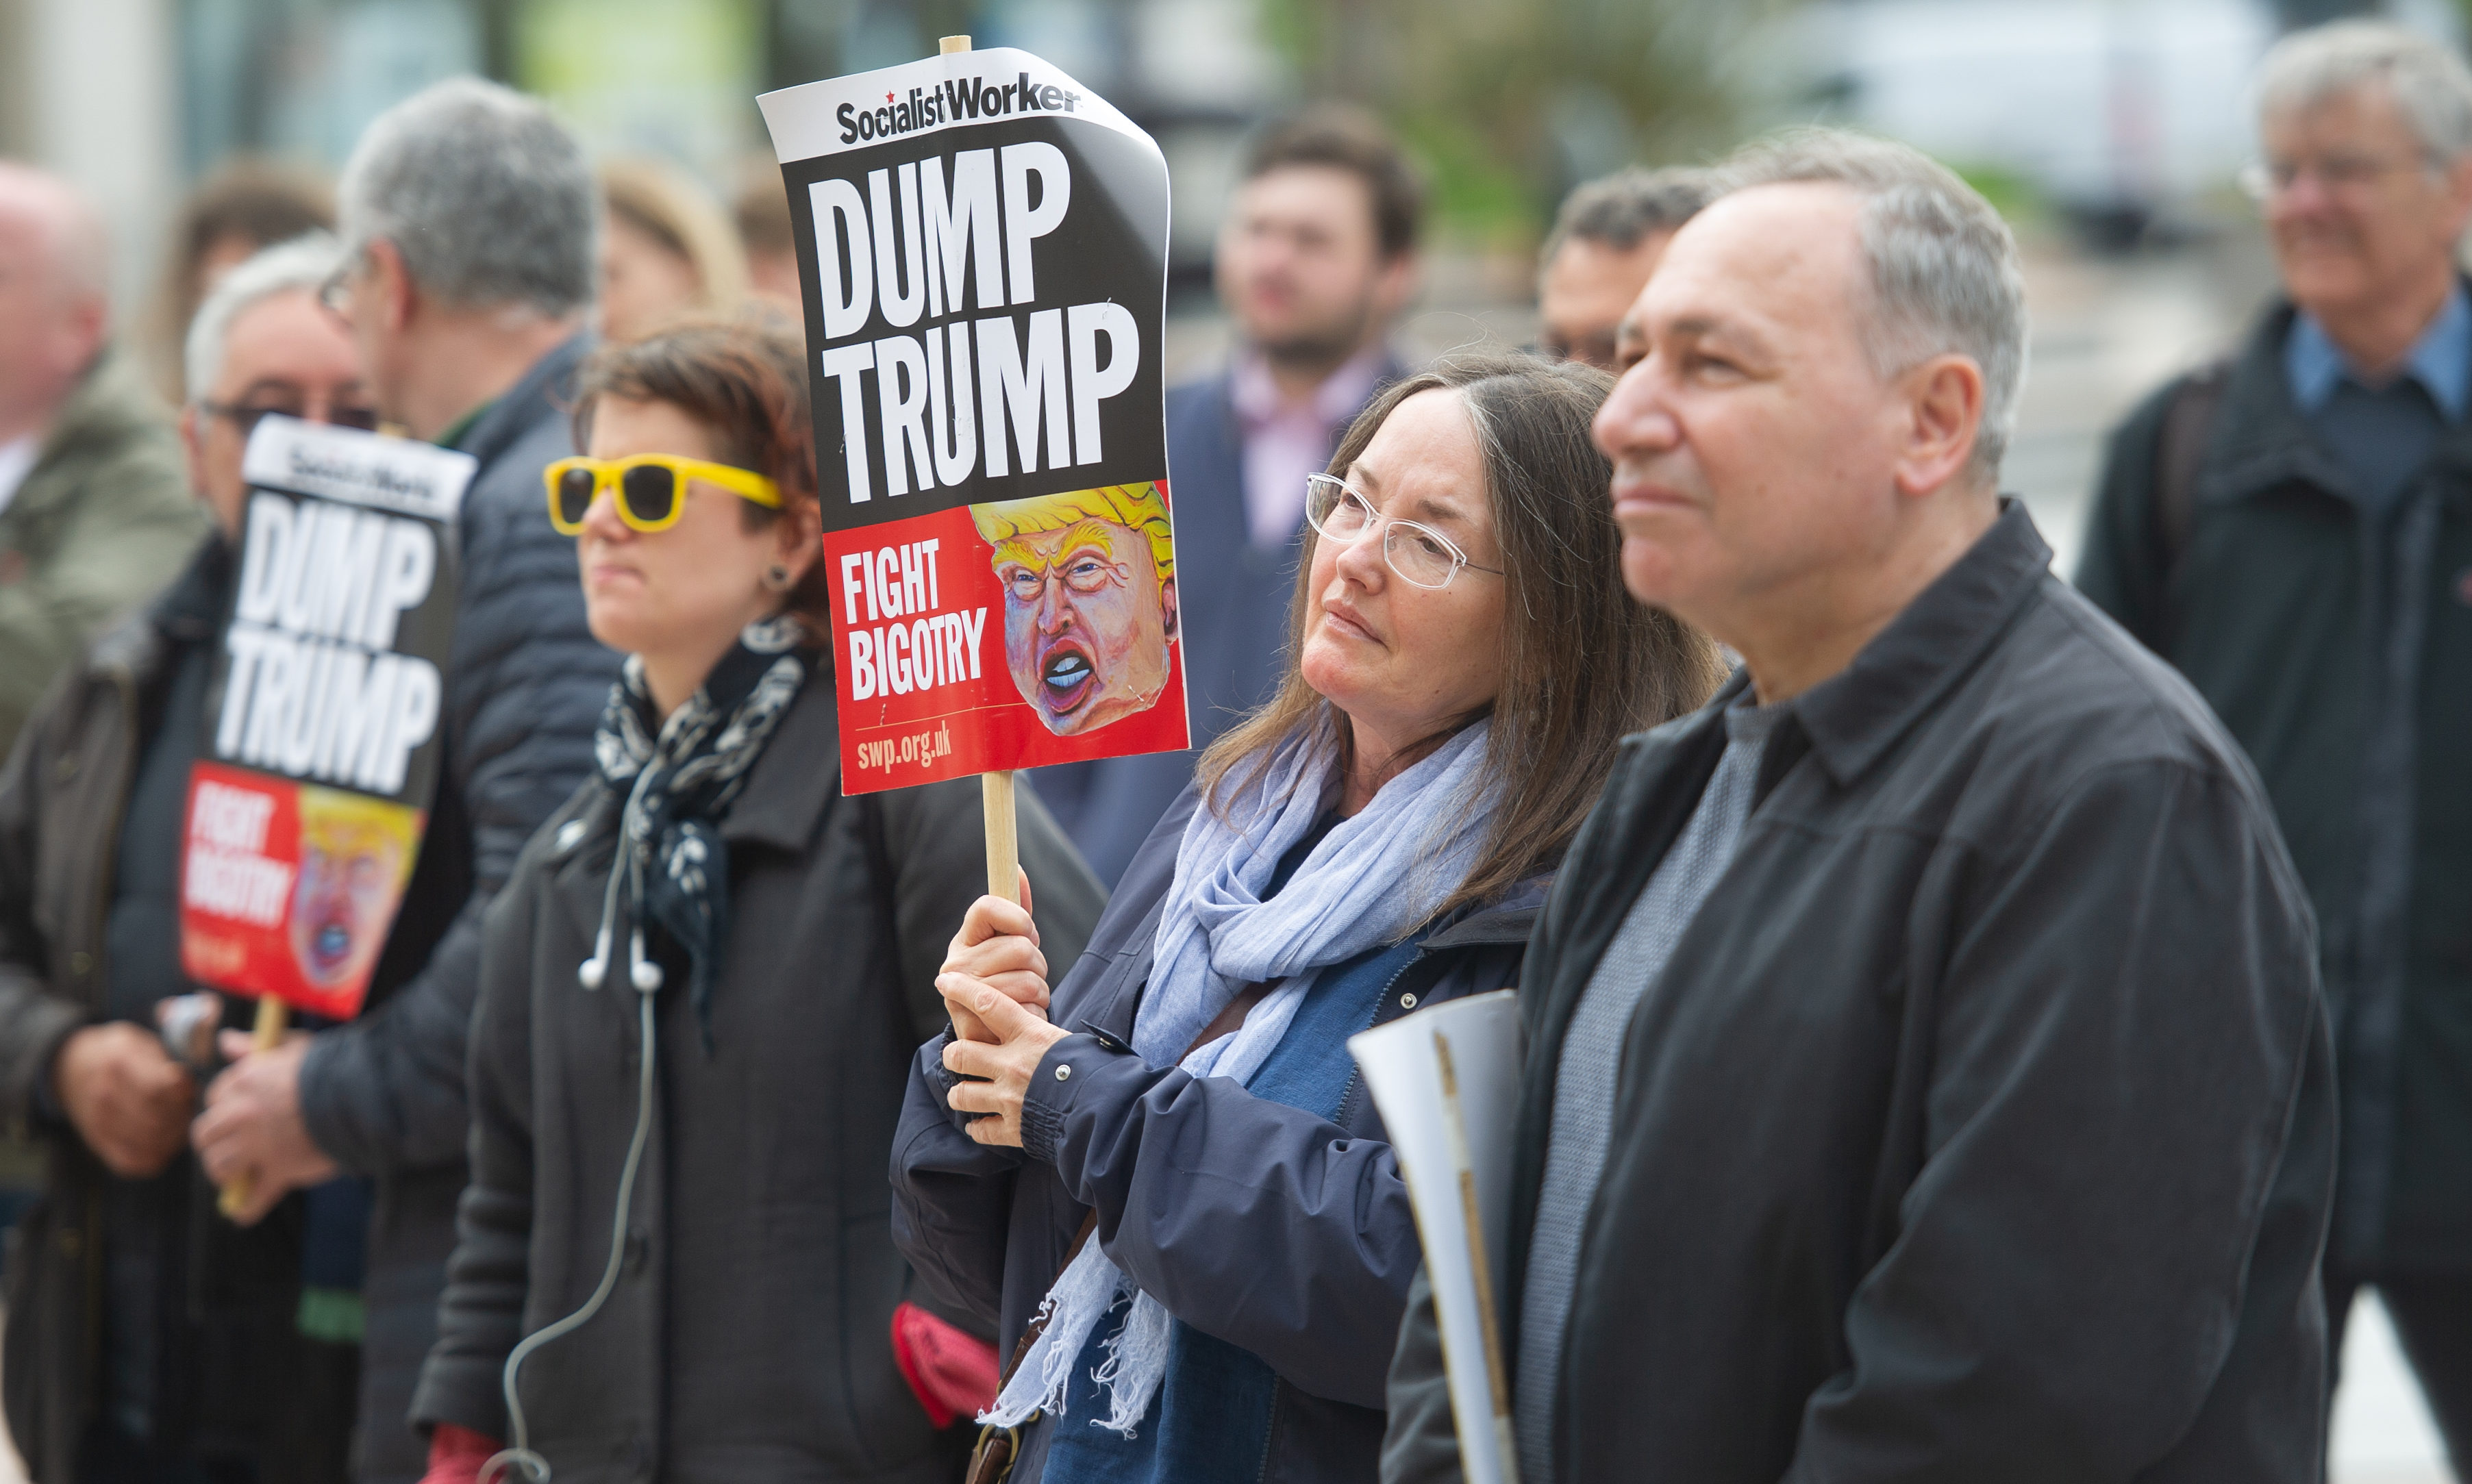 The Anti-Trump rally, City Square, Dundee, June 4 2019.